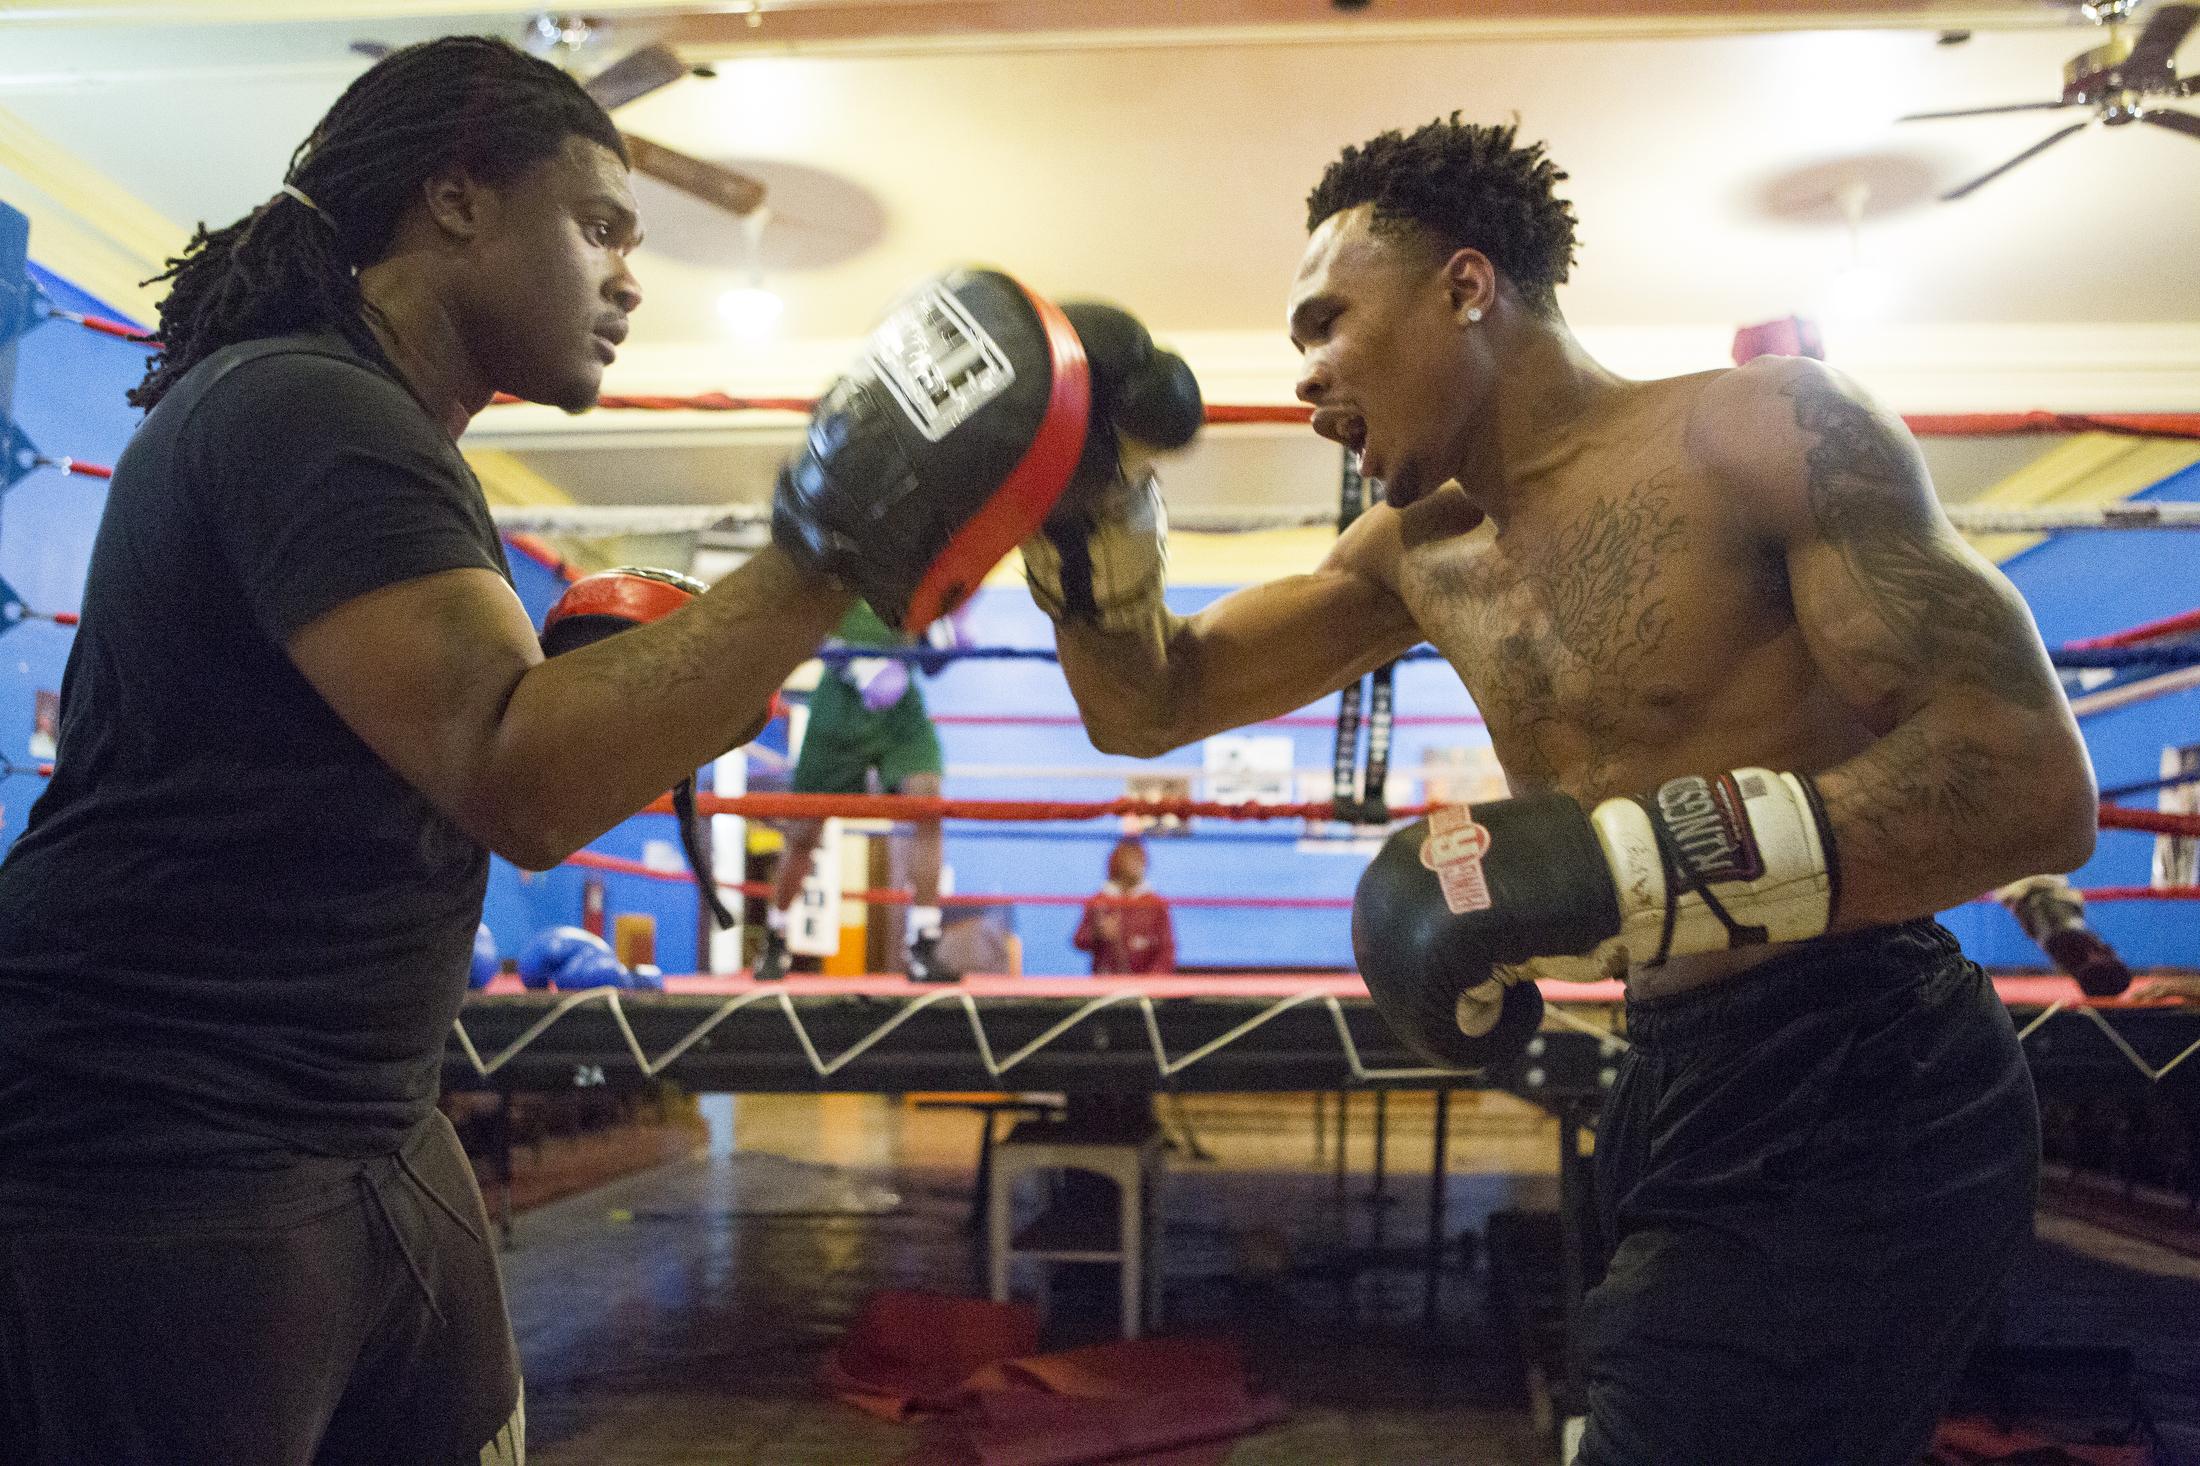 10 years in a boxing gym - Isiah training for the Chicago Golden Gloves with Dionte